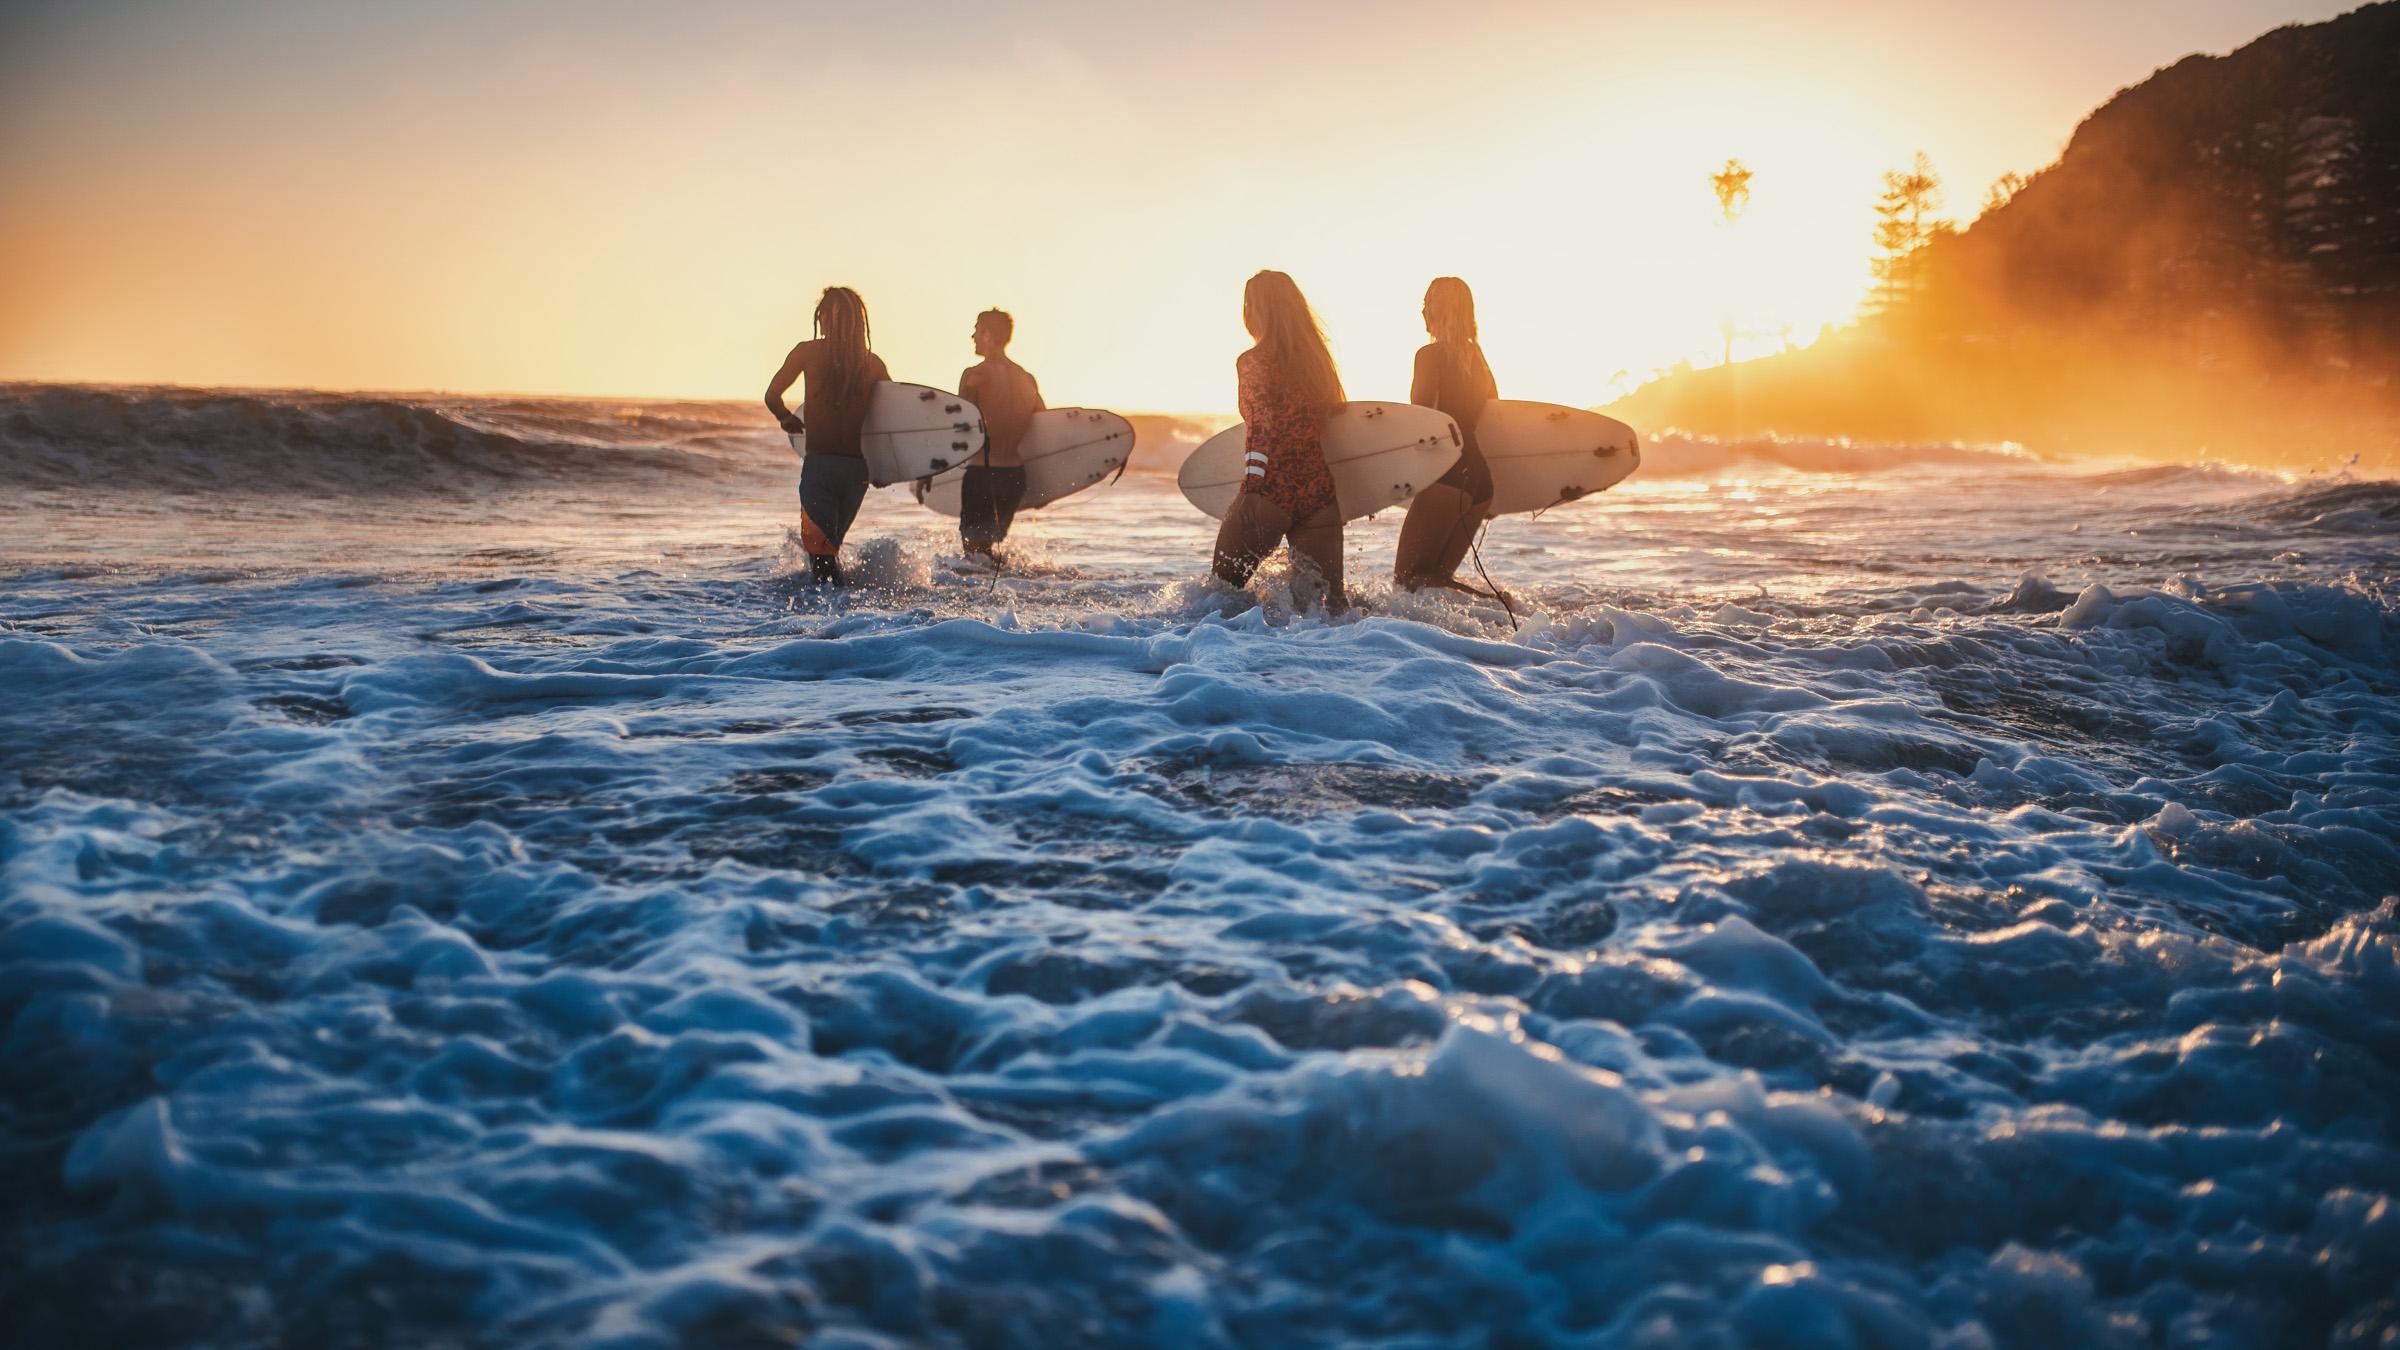 Four surfers, running into the water early in the morning with surfboards in their hands.